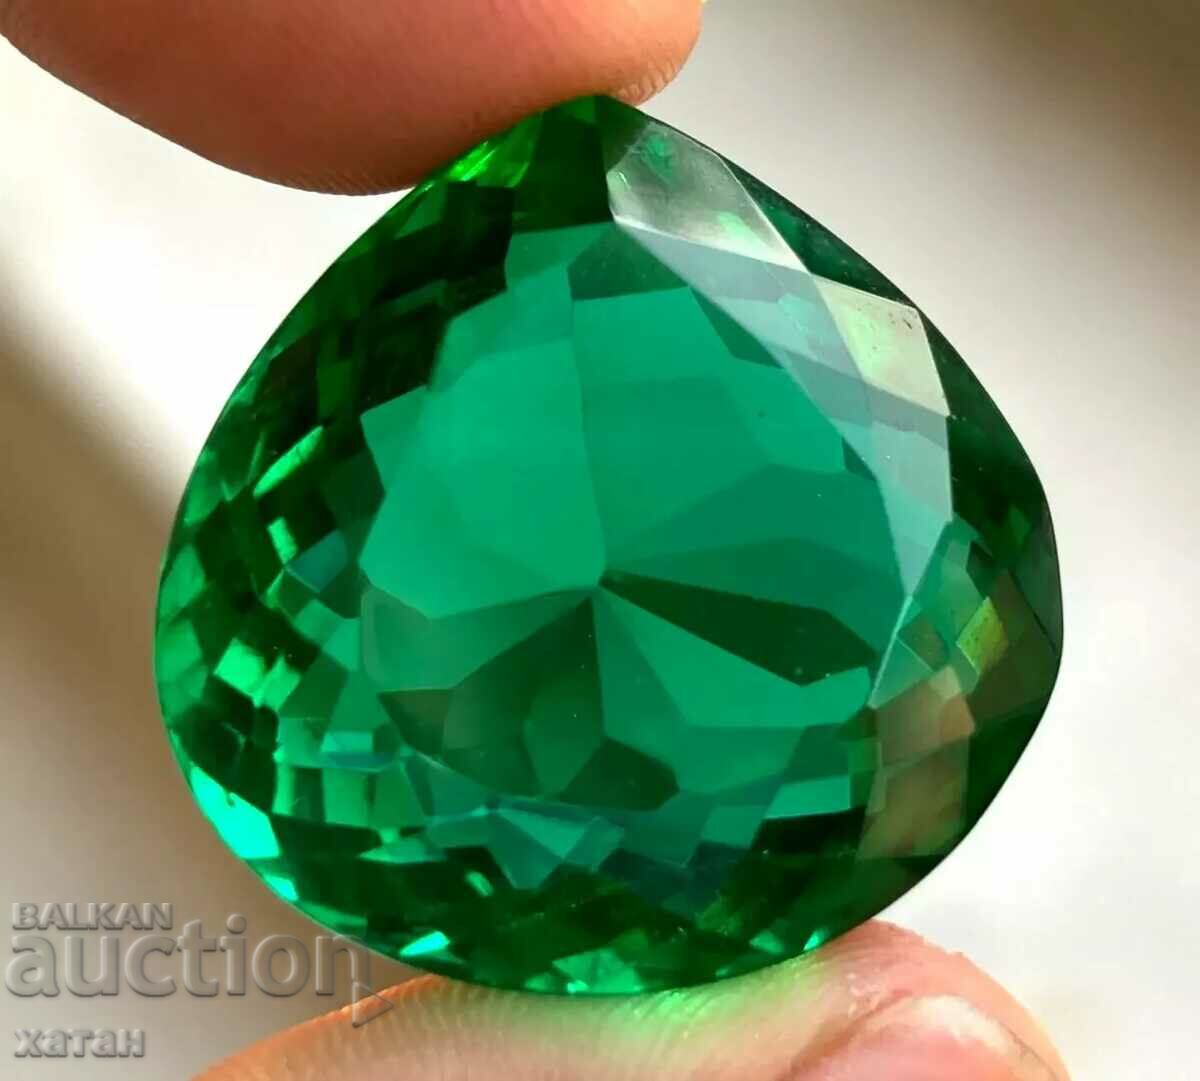 BZC! 17.10 Carat Natural Green Topaz from 1 Penny!